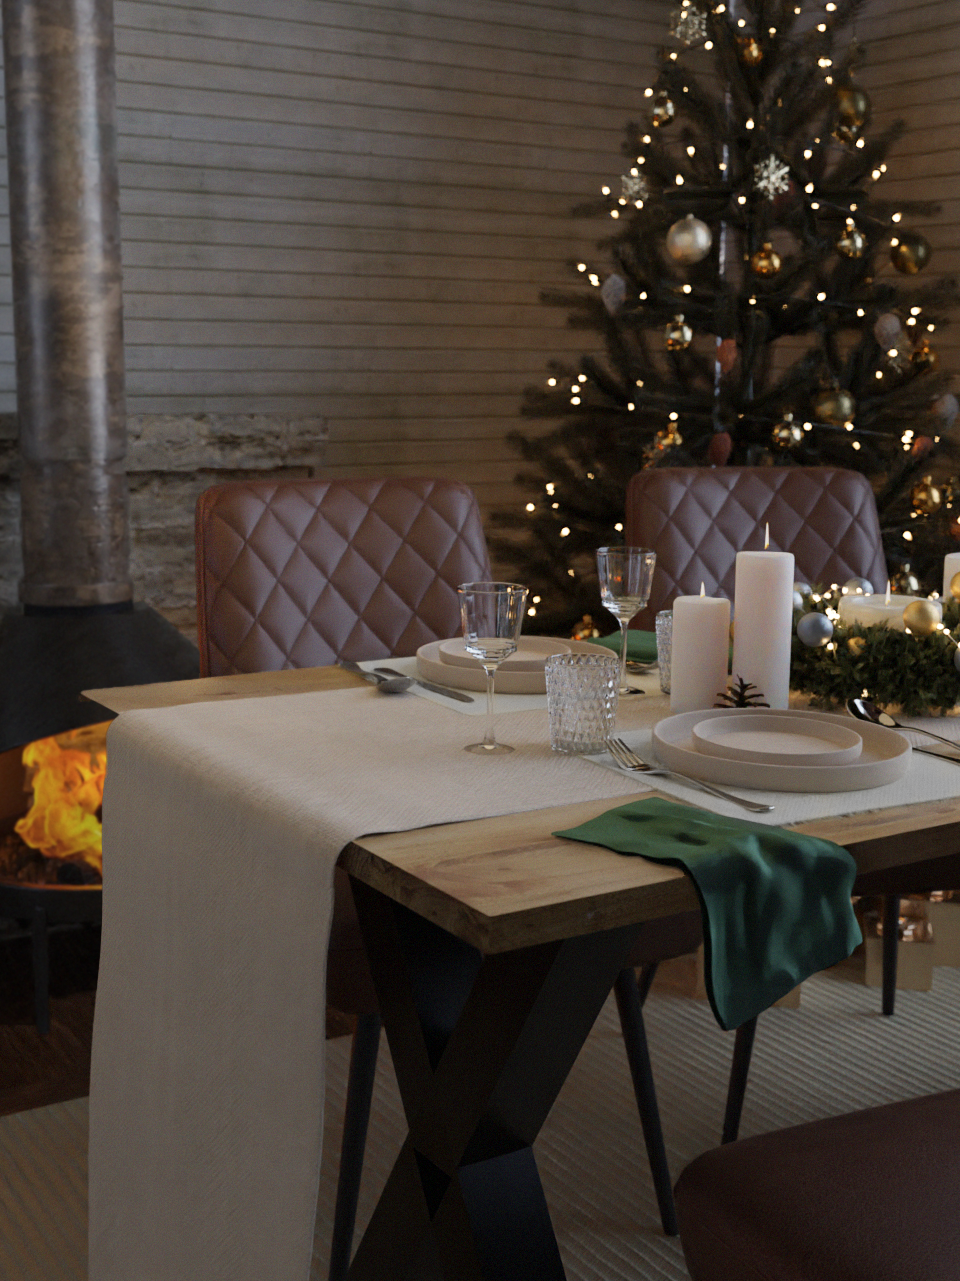 Stunning Dining Table and Chairs - Christmas